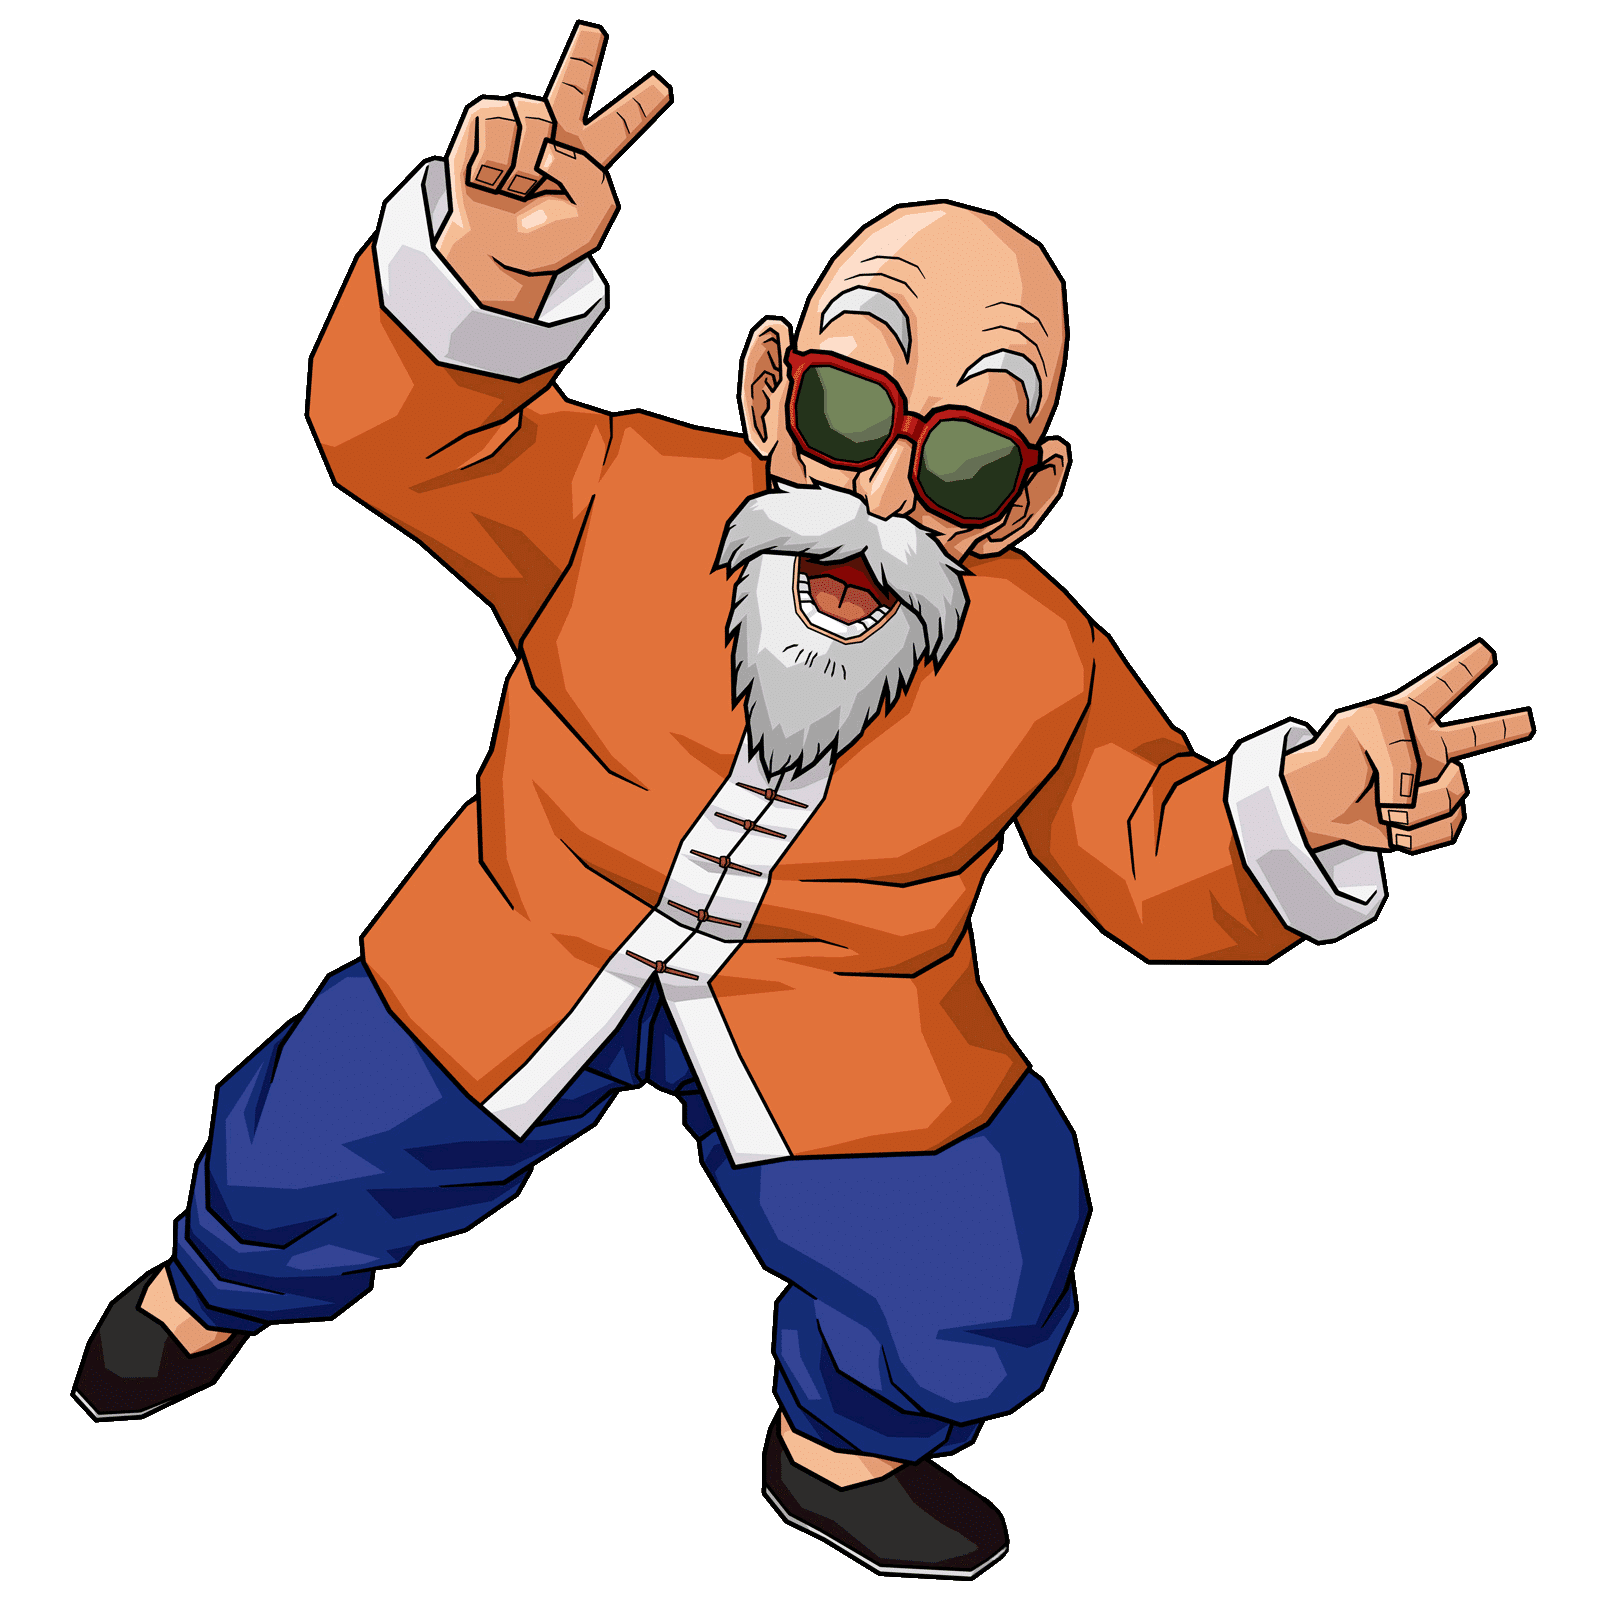 MASTER ROSHI’S RISE FROM THE FALL!!!